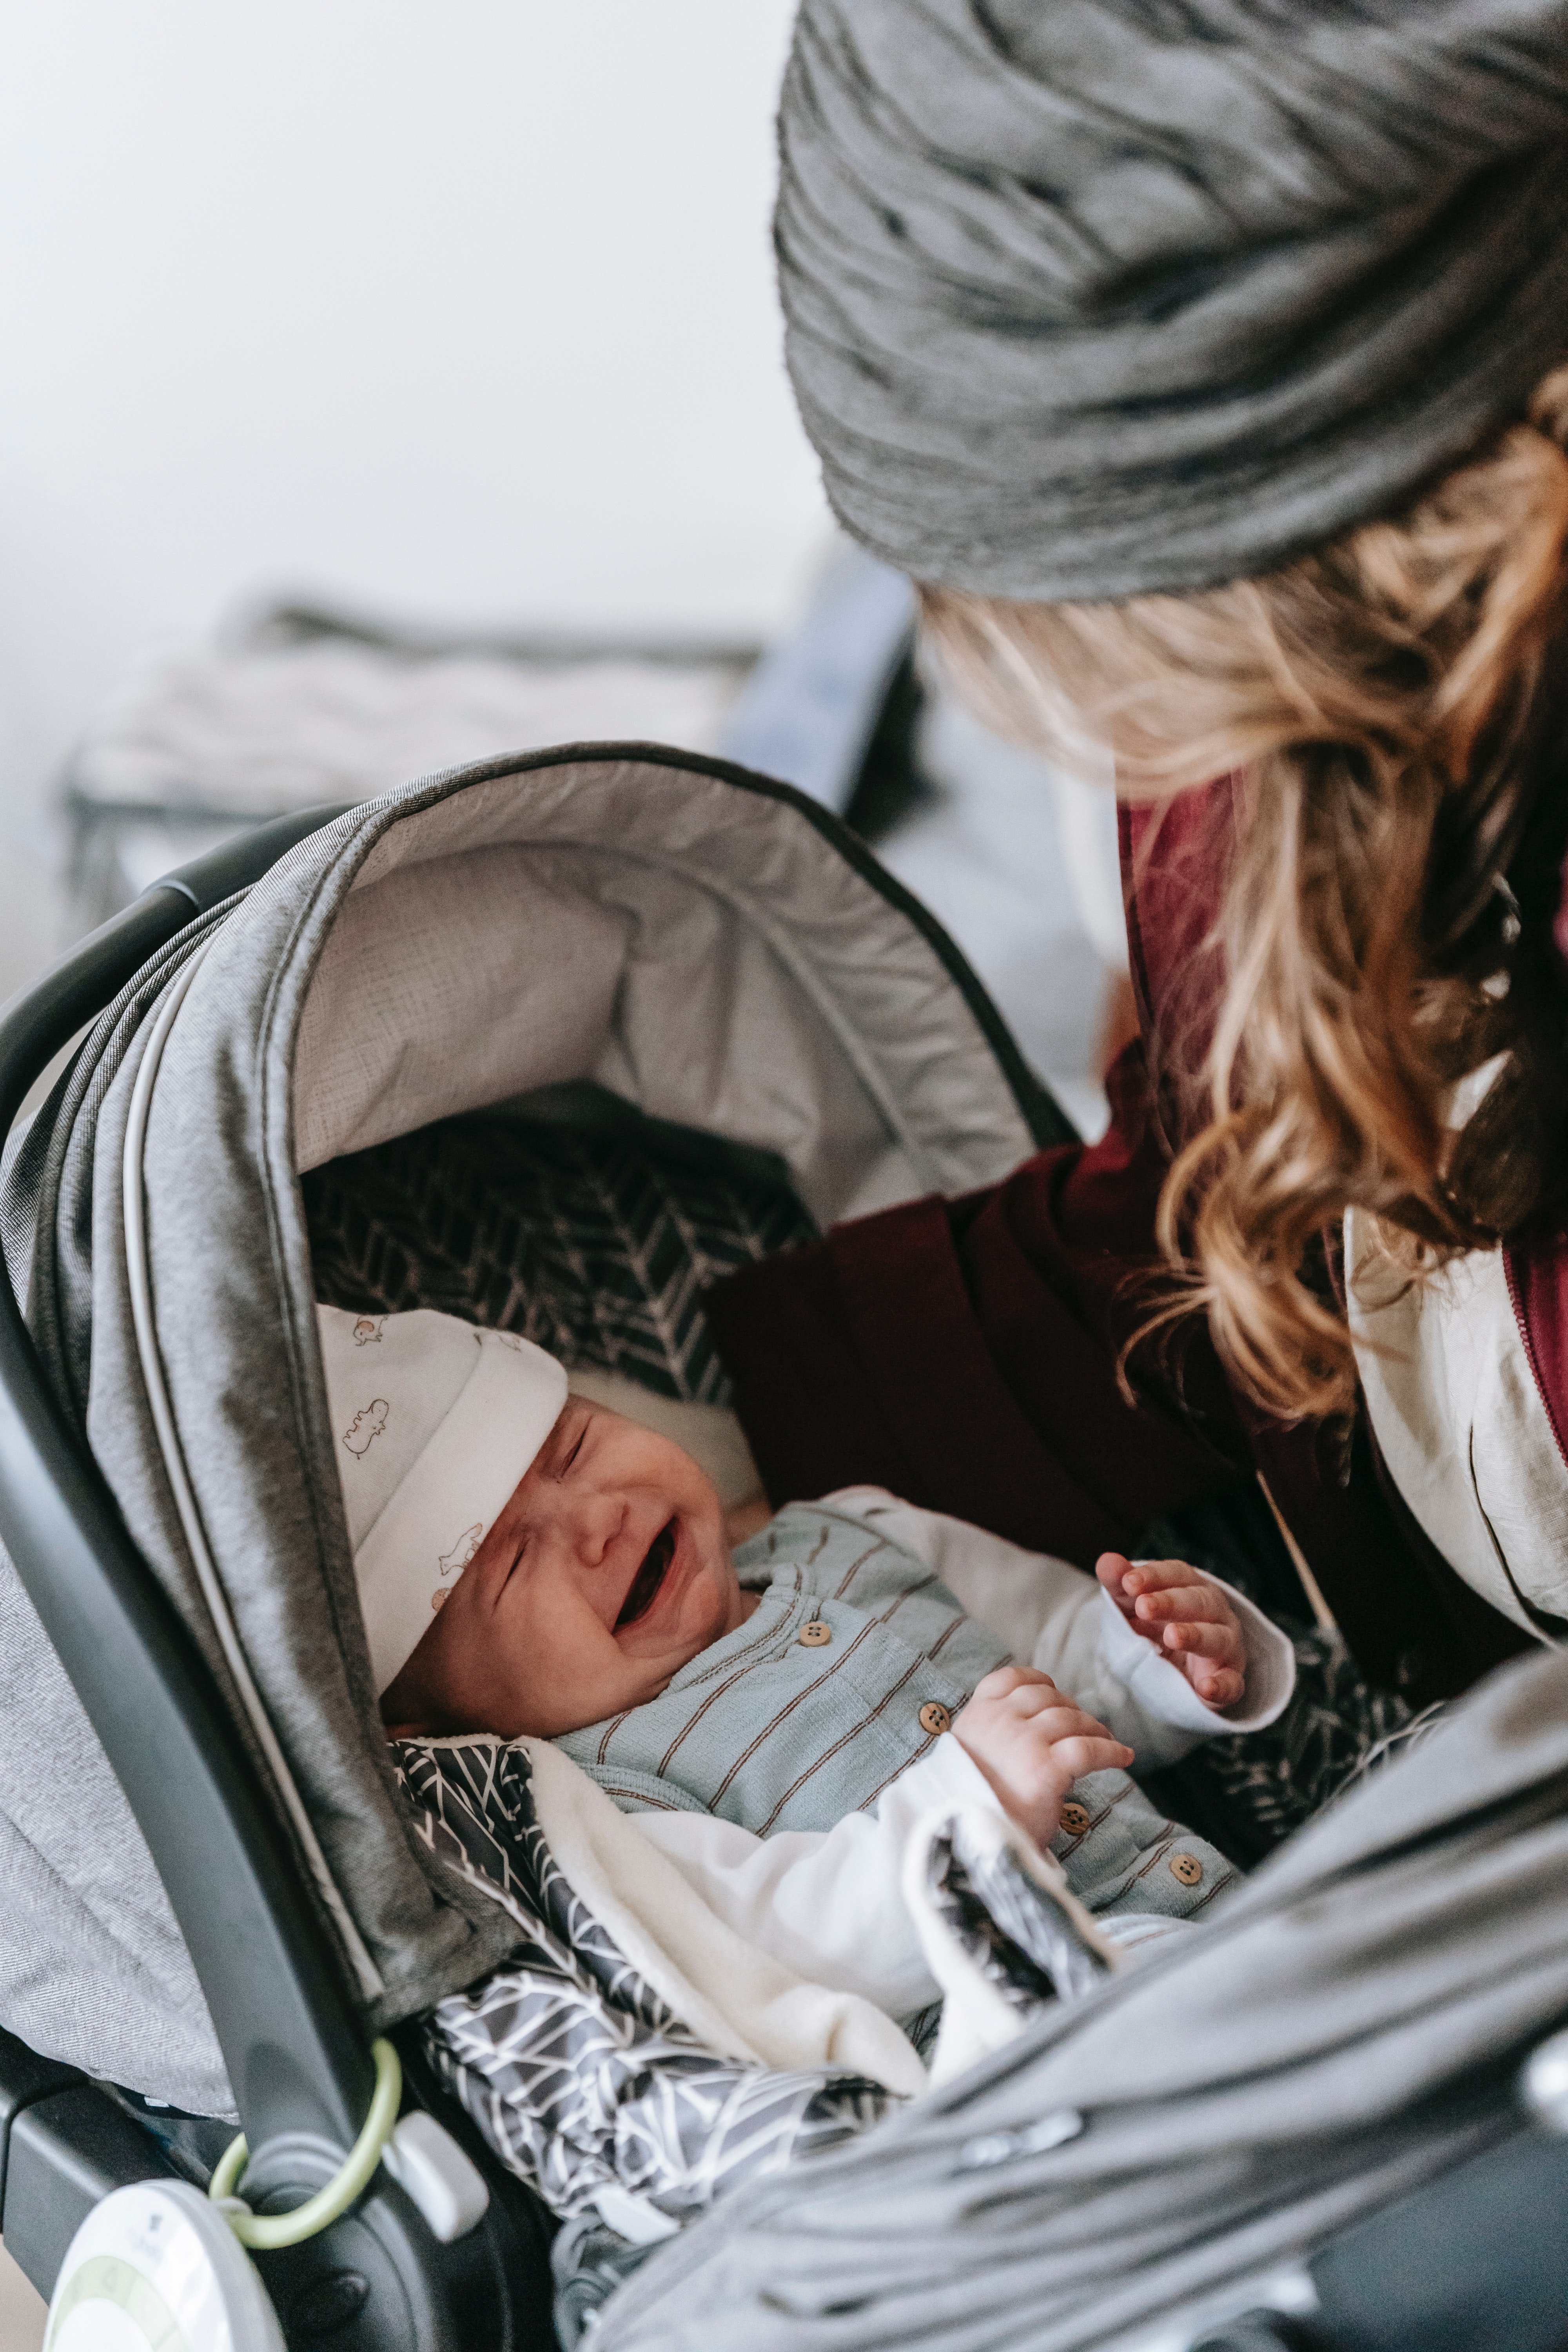 Emma was shocked to find Theo with a baby in a stroller. | Source: Pexels